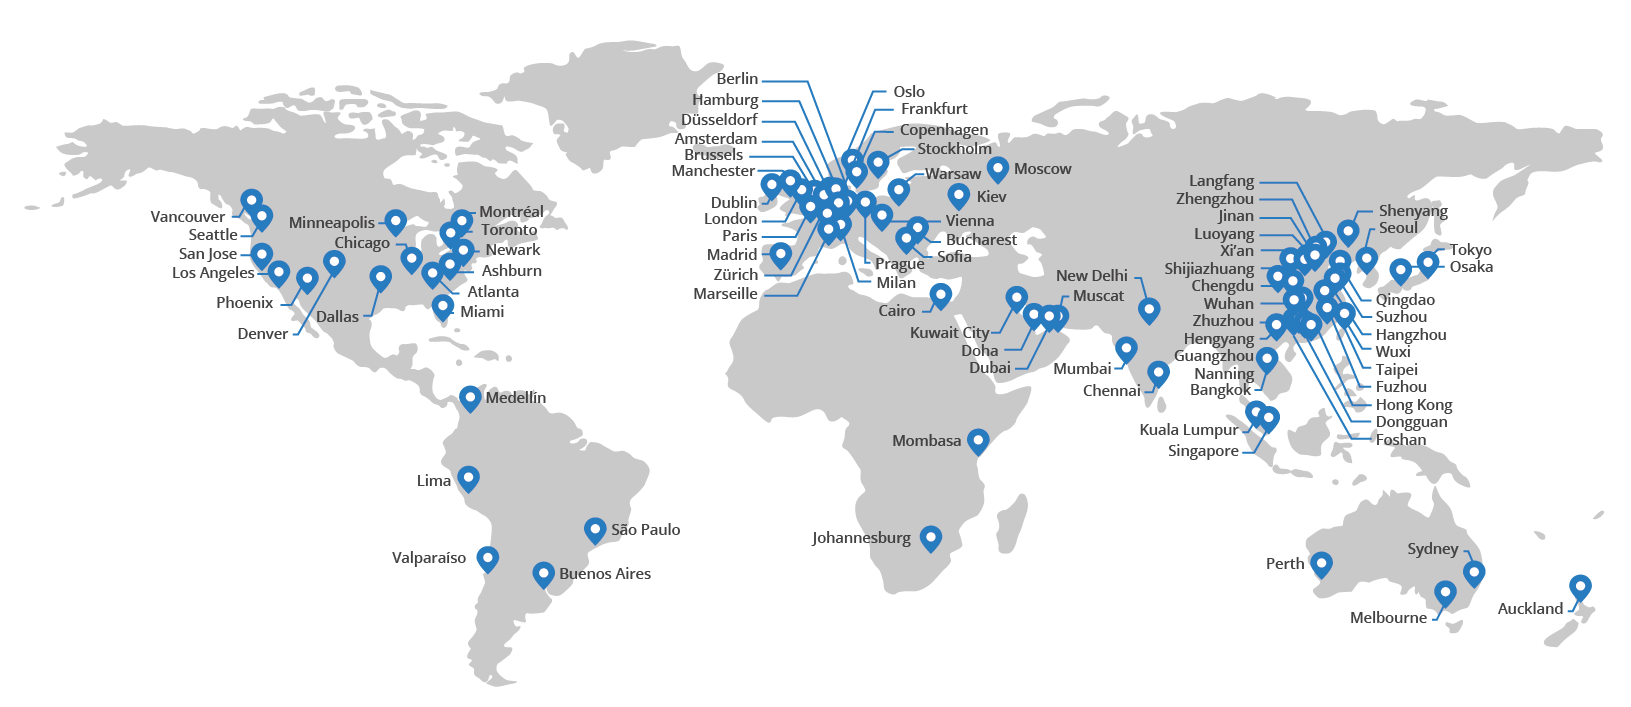 network-map cloudflare